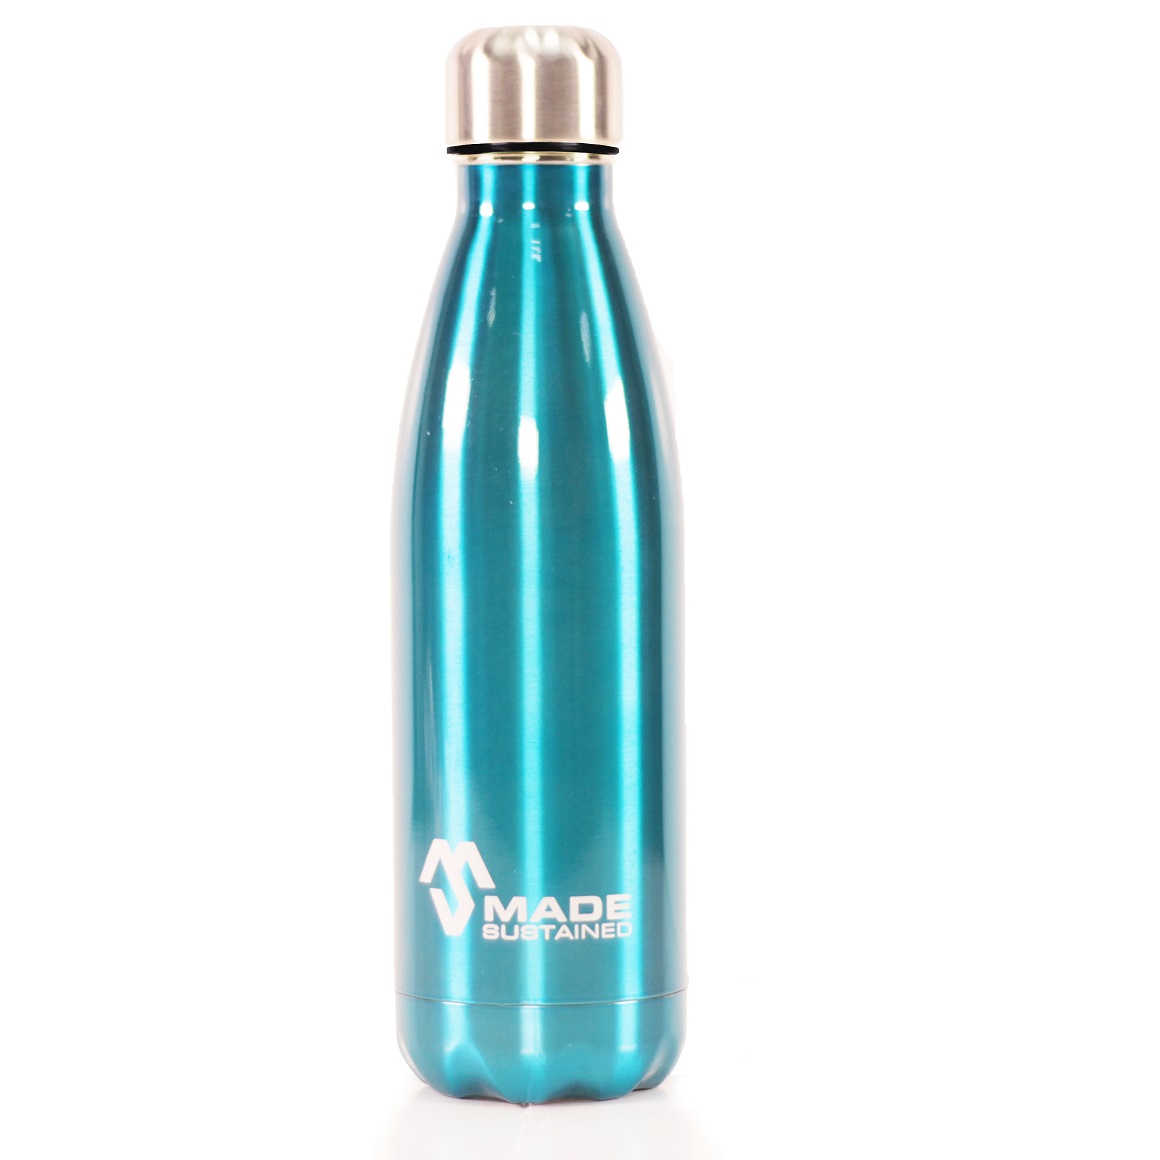 Made Sustained Insulated Bottle - 350ml